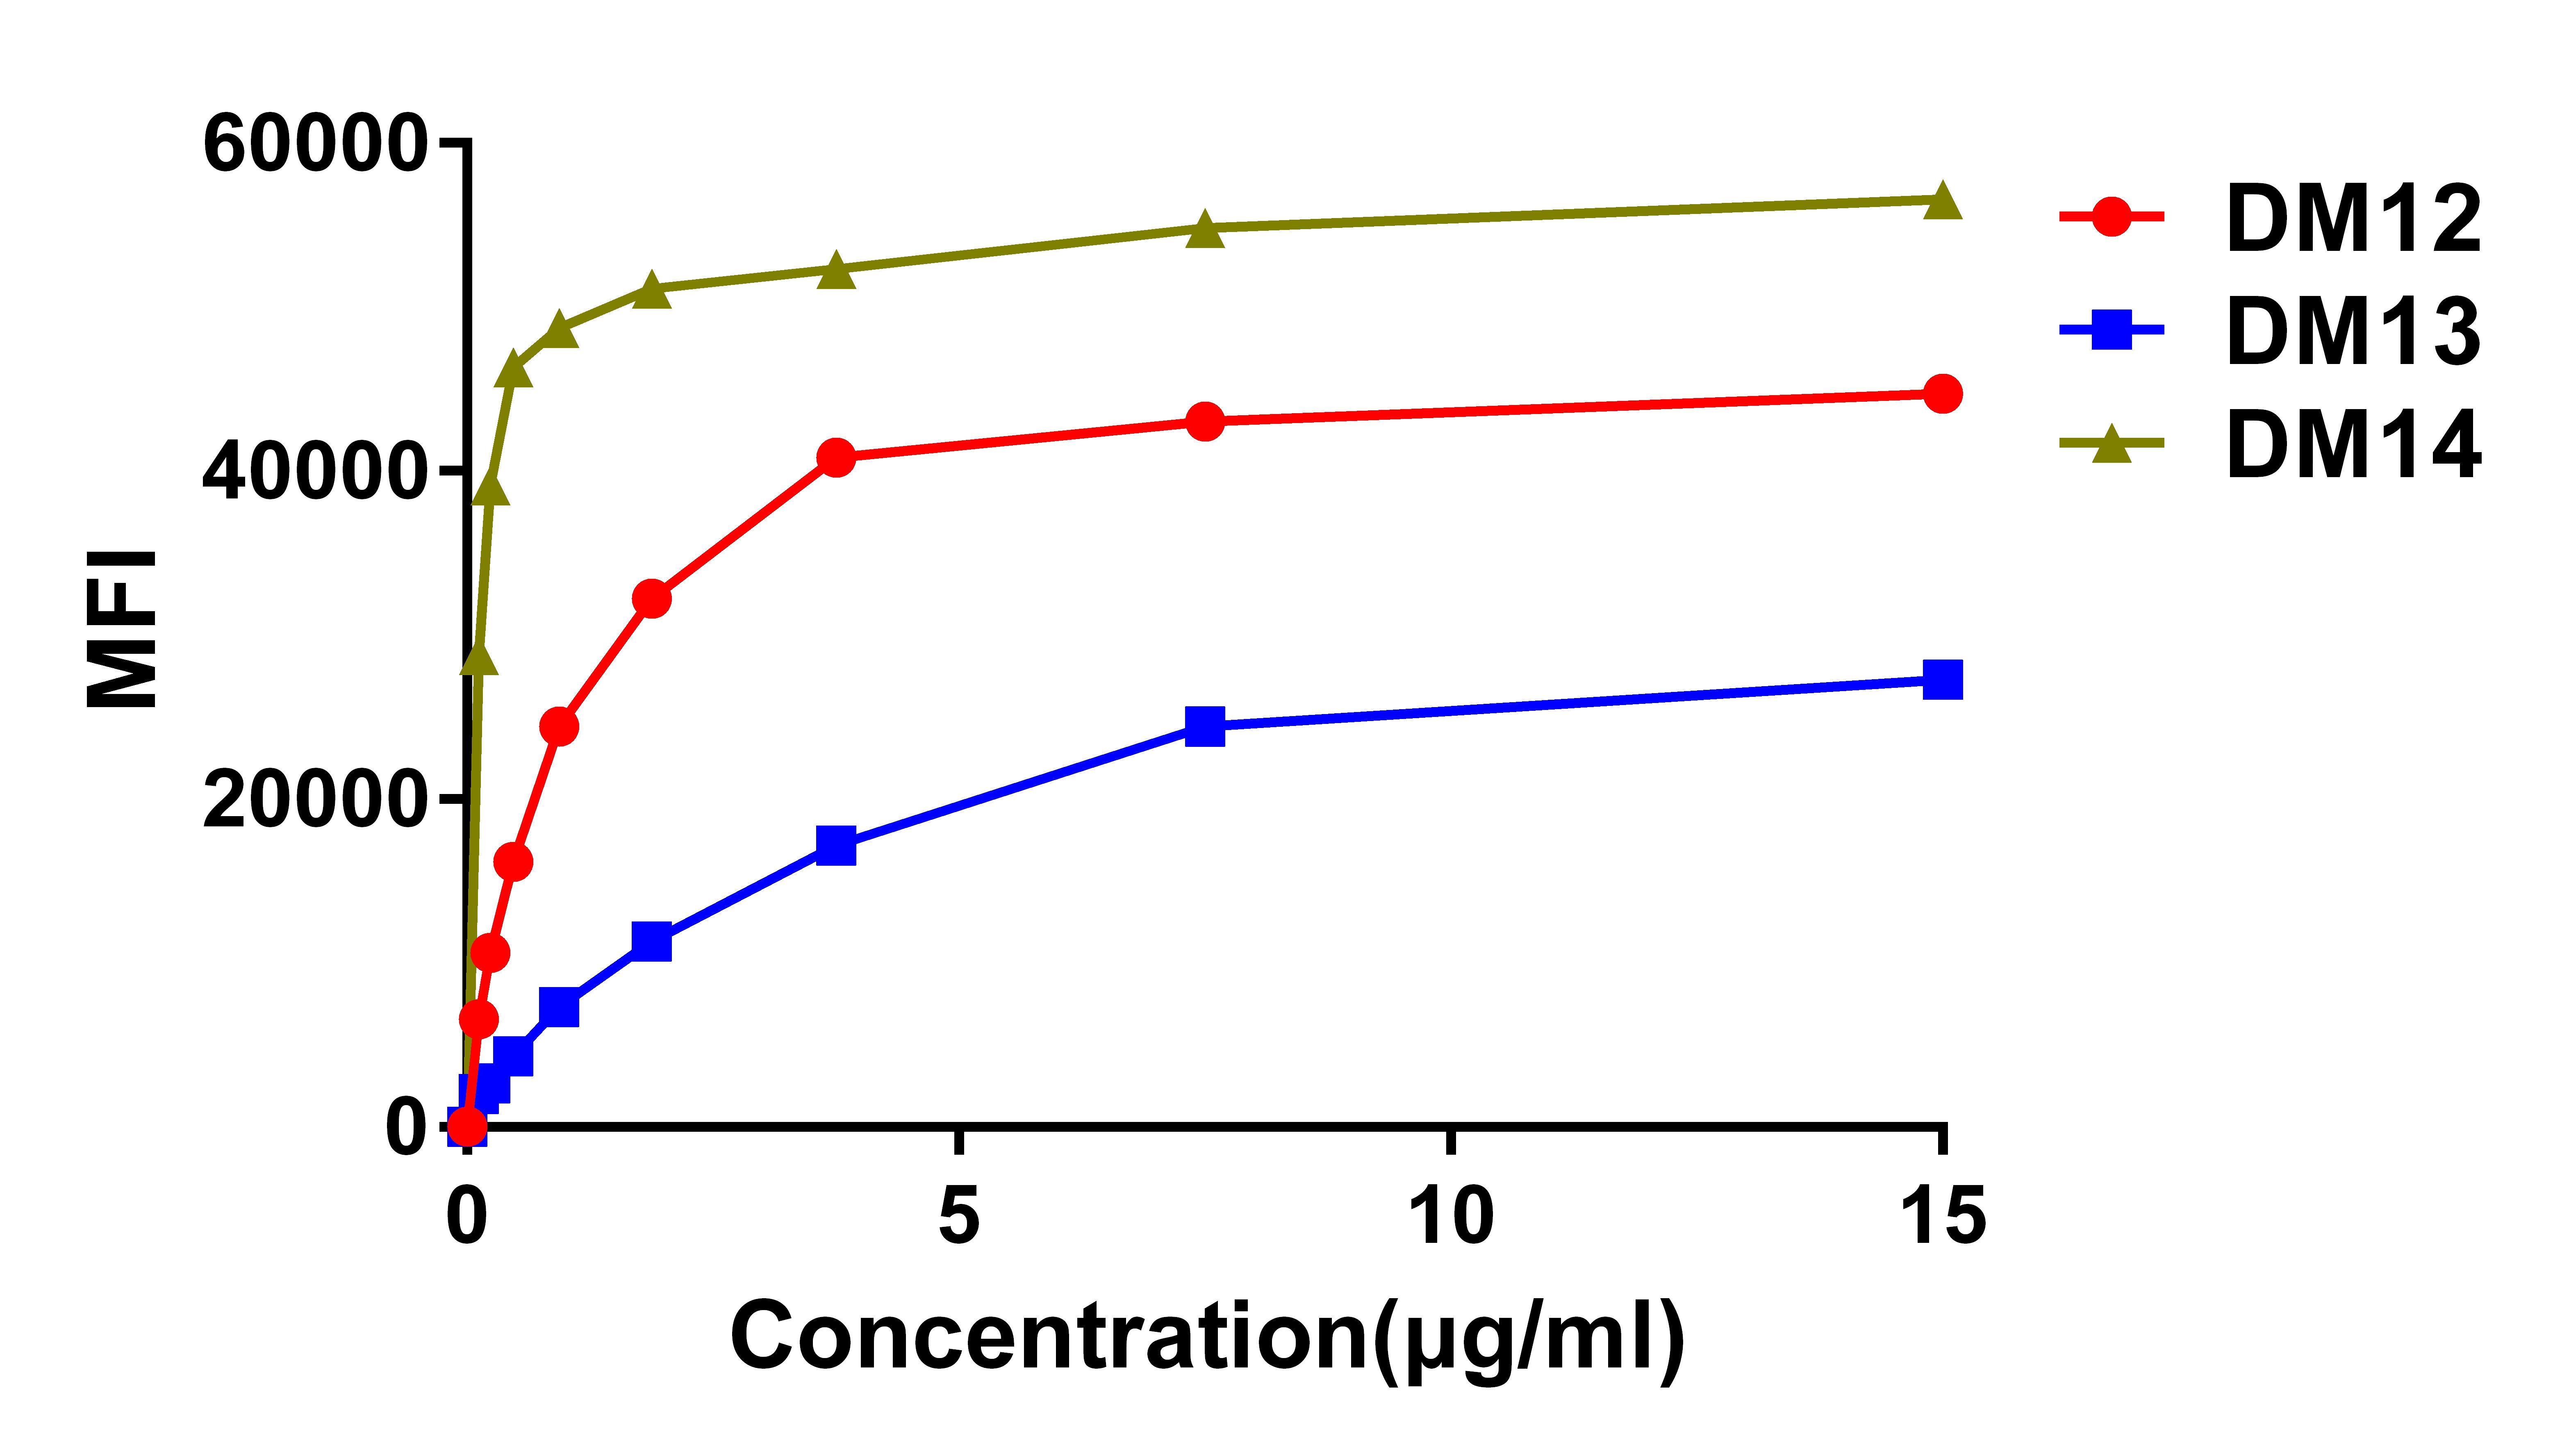 Figure 3. Affinity ranking of different Rabbit anti-CD22 mAb clones by titration of different concentration onto Raji cells. The Y-axis represents the mean fluorescence intensity (MFI) while the X-axis represents the concentration of IgG used.